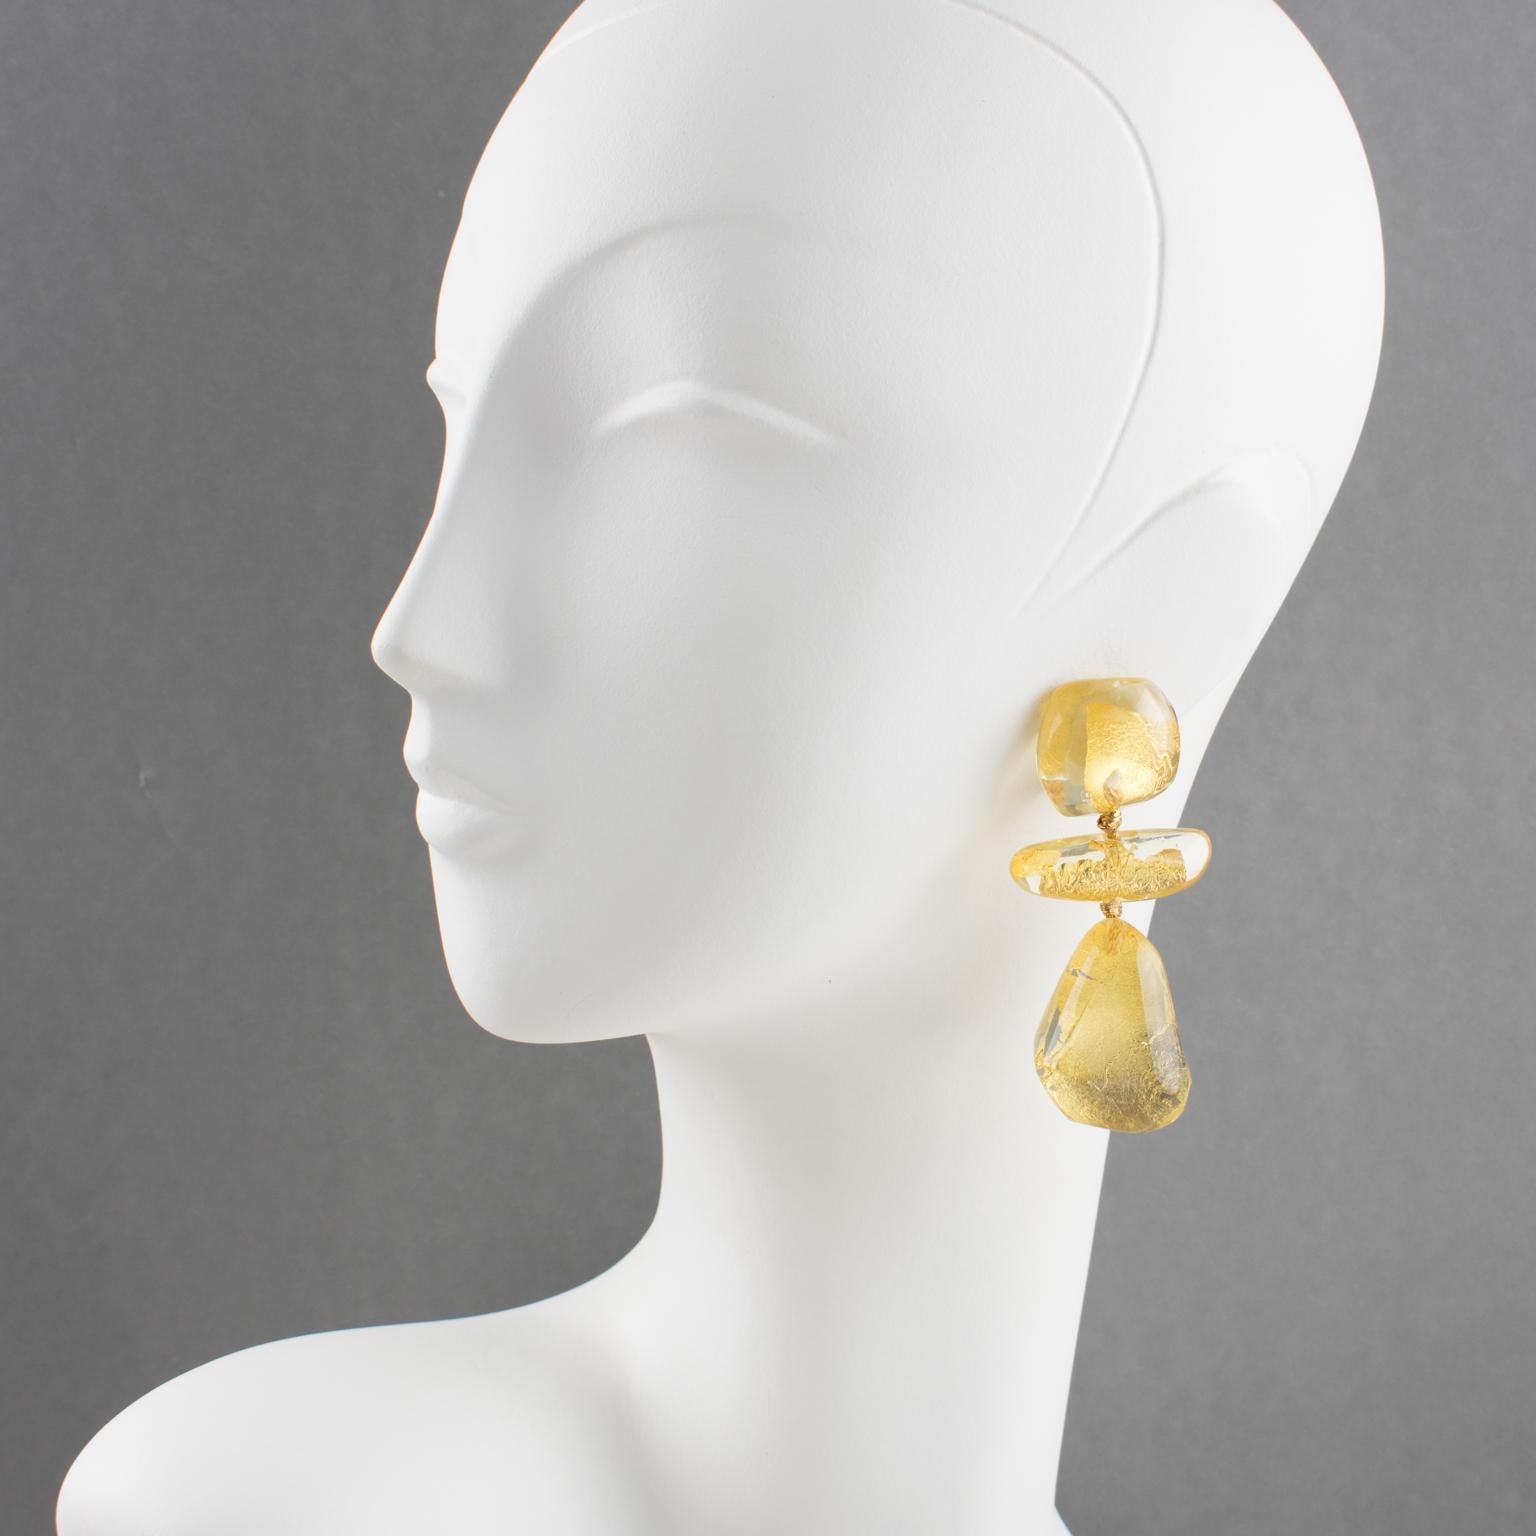 Stunning oversized clip on earrings by Gerda Lyngaard for Monies. Dangling pebble and drop shape with crystal clear Lucite or resin and gold foil inclusions. Marked 'Monies' on clasp. 
Measurements: 2.88 in. high (7.3 cm) x 1.38 in. wide (3.5 cm)